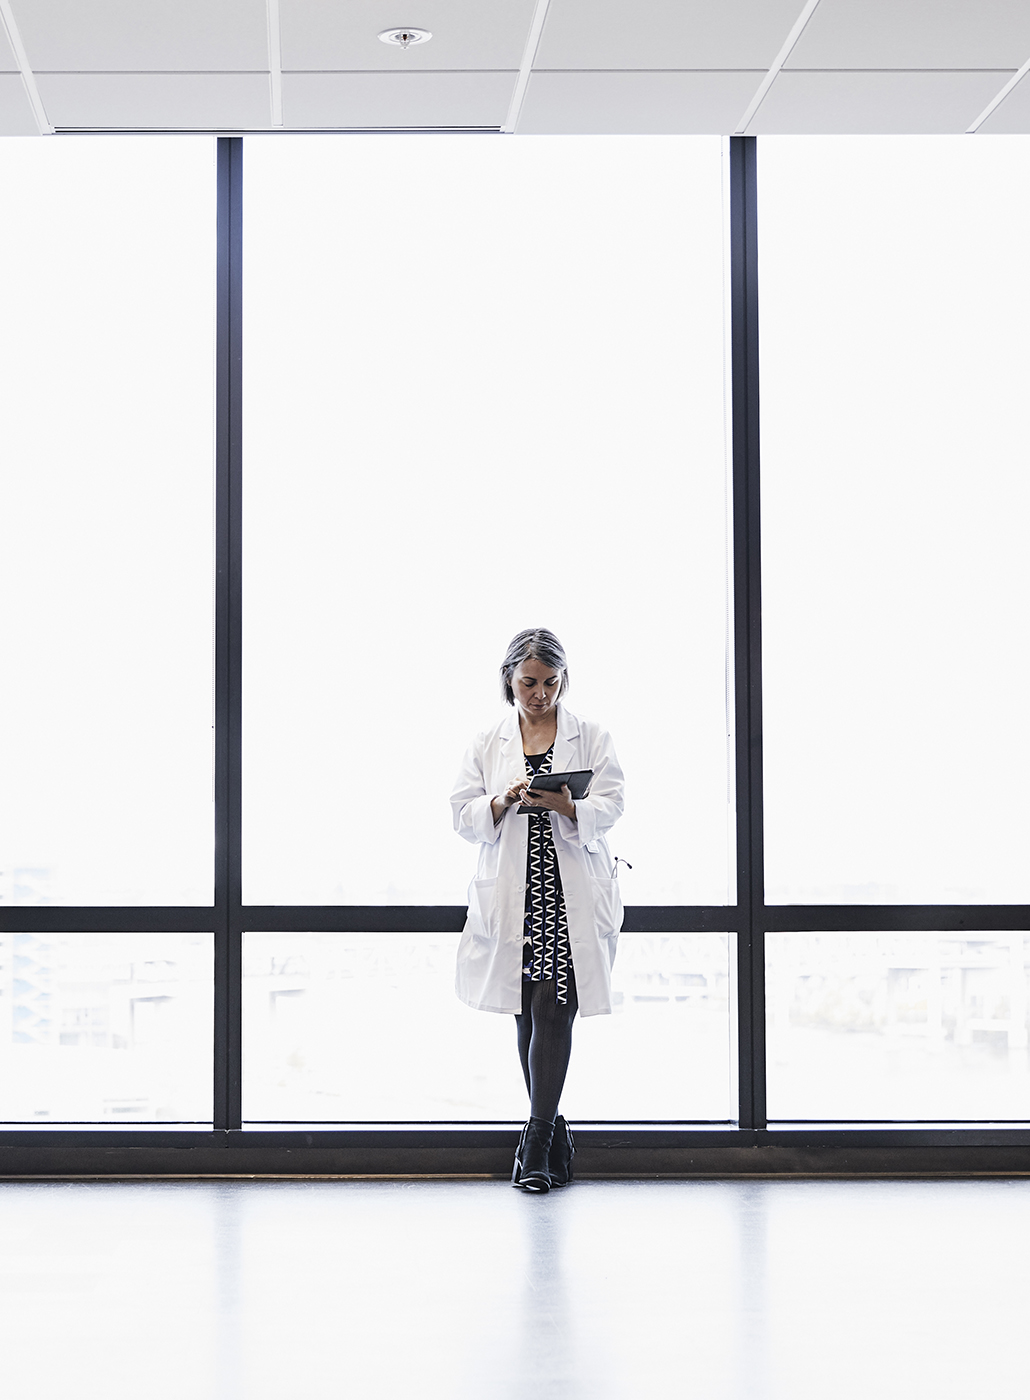 Female doctor using a digital tablet in front of large windows.